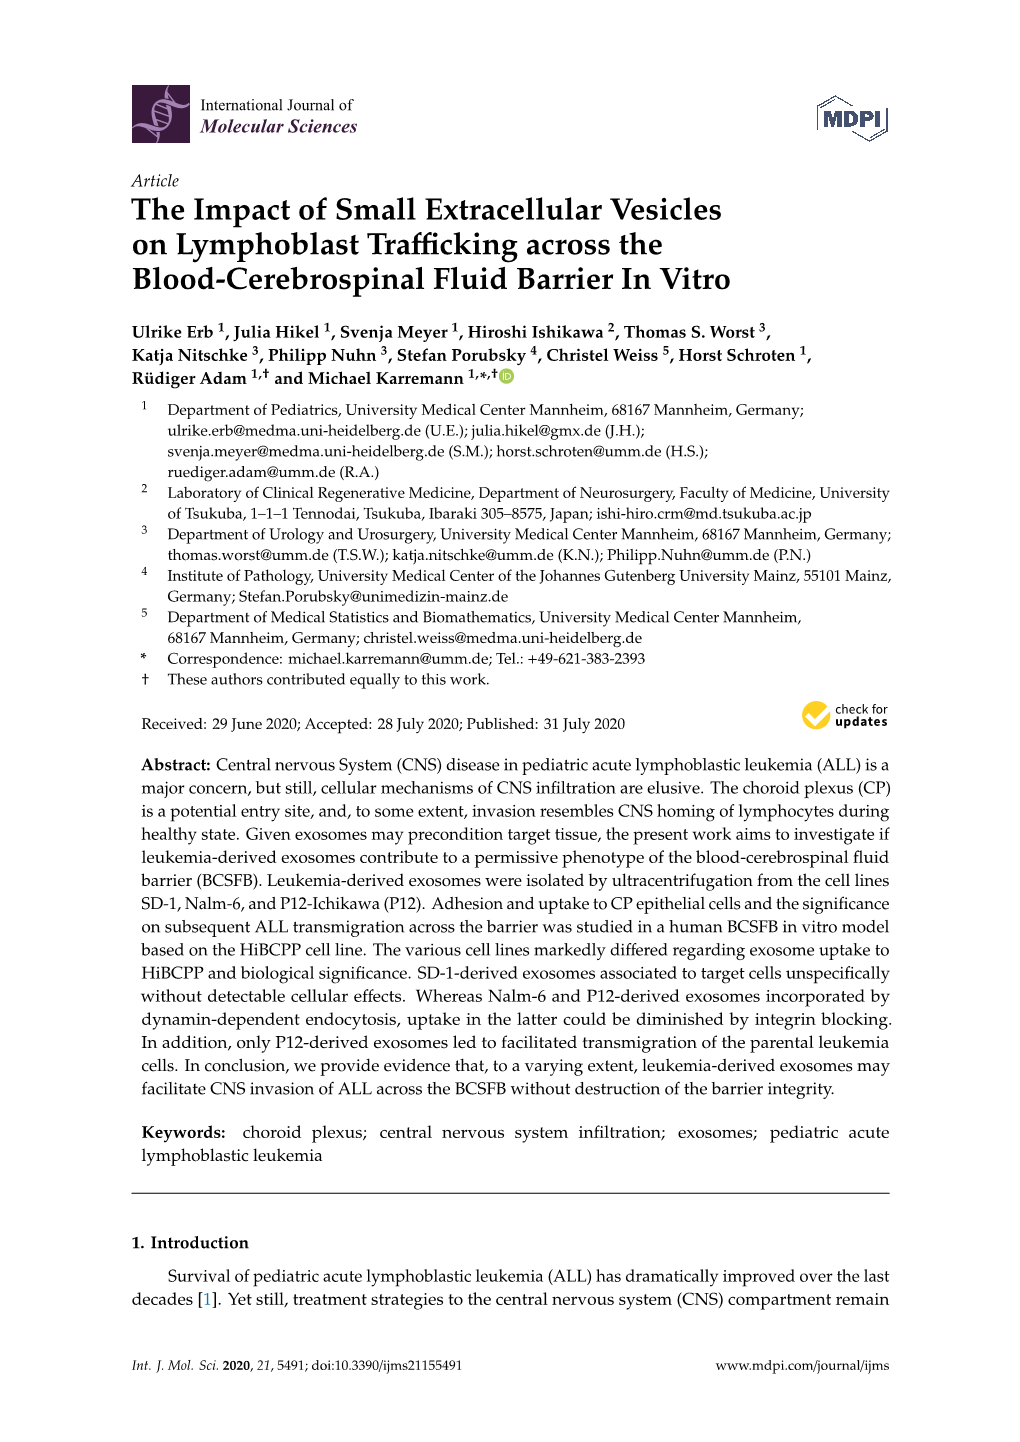 The Impact of Small Extracellular Vesicles on Lymphoblast Trafficking